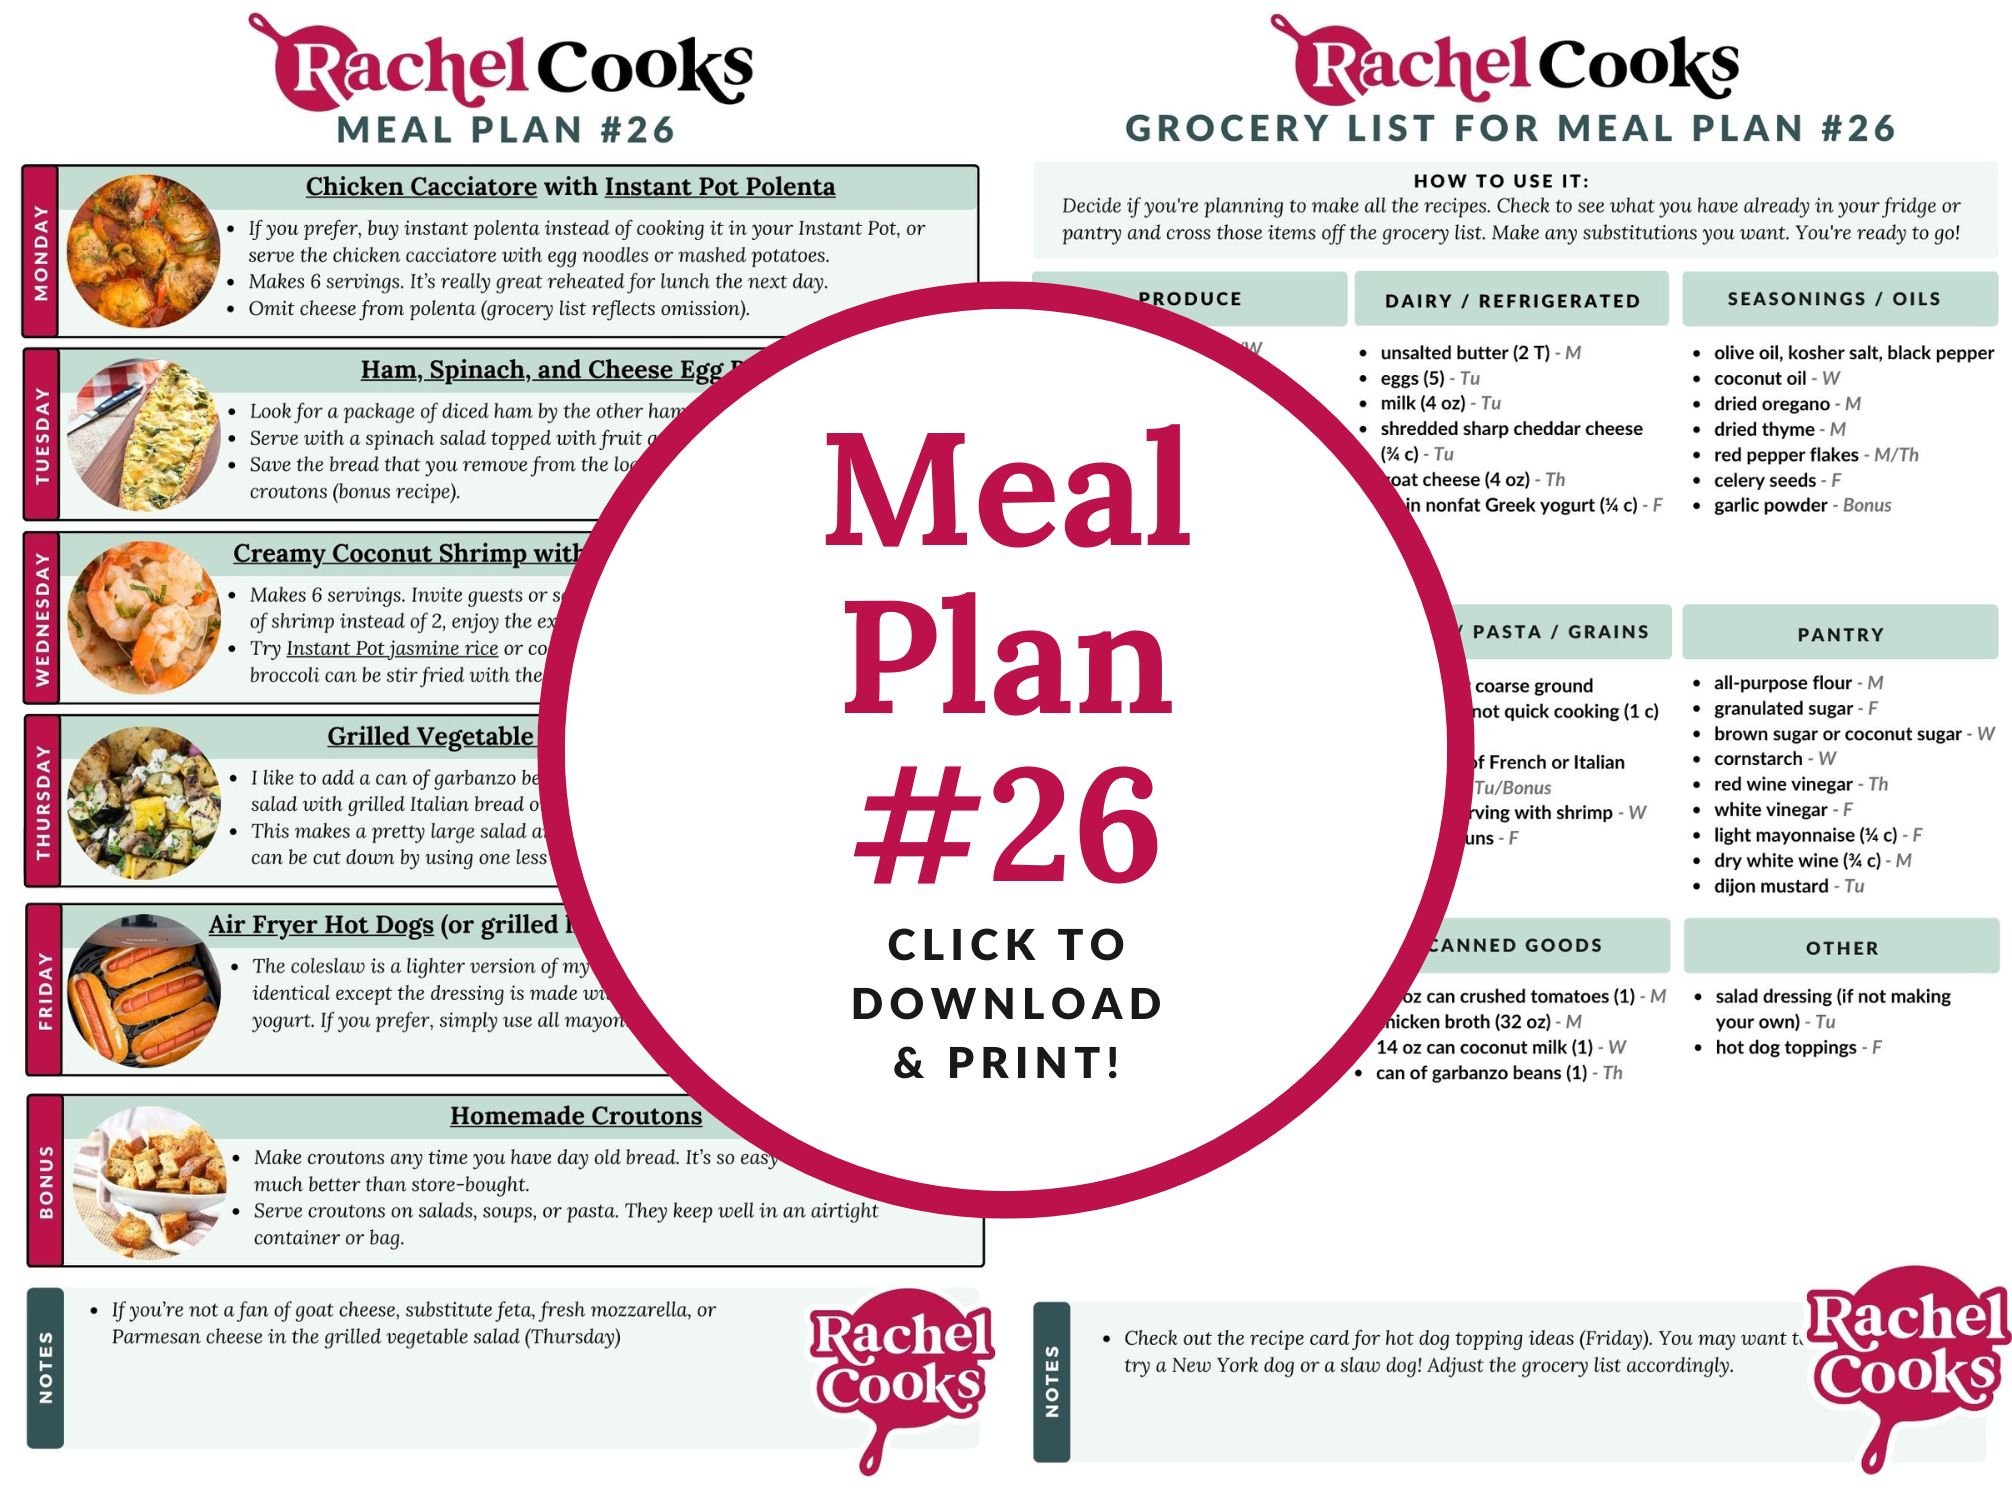 Meal plan 26 preview image.